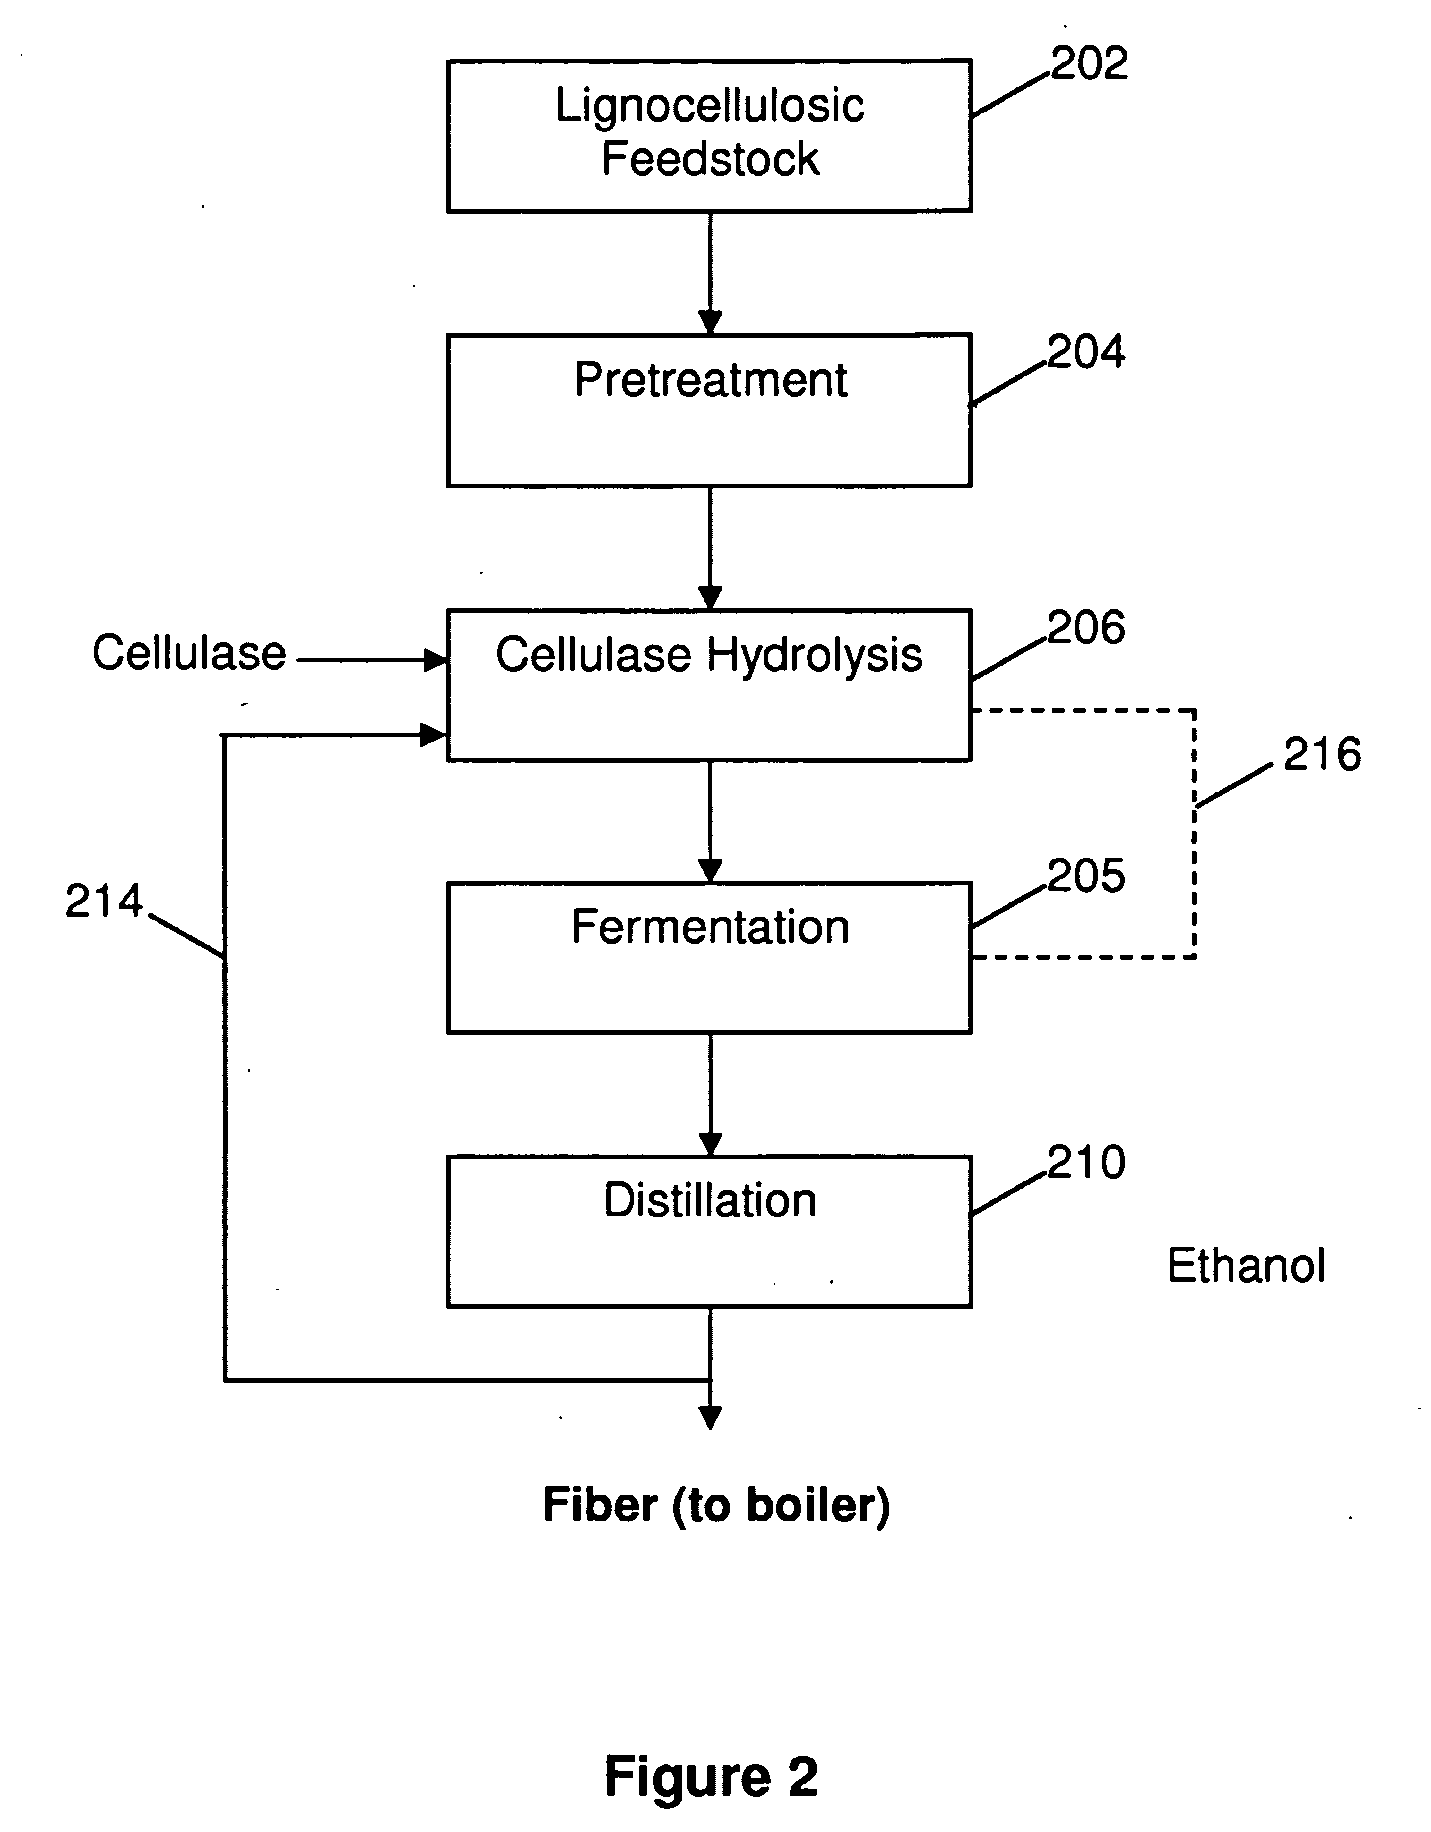 Method for the production of alcohol from a pretreated lignocellulosic feedstock